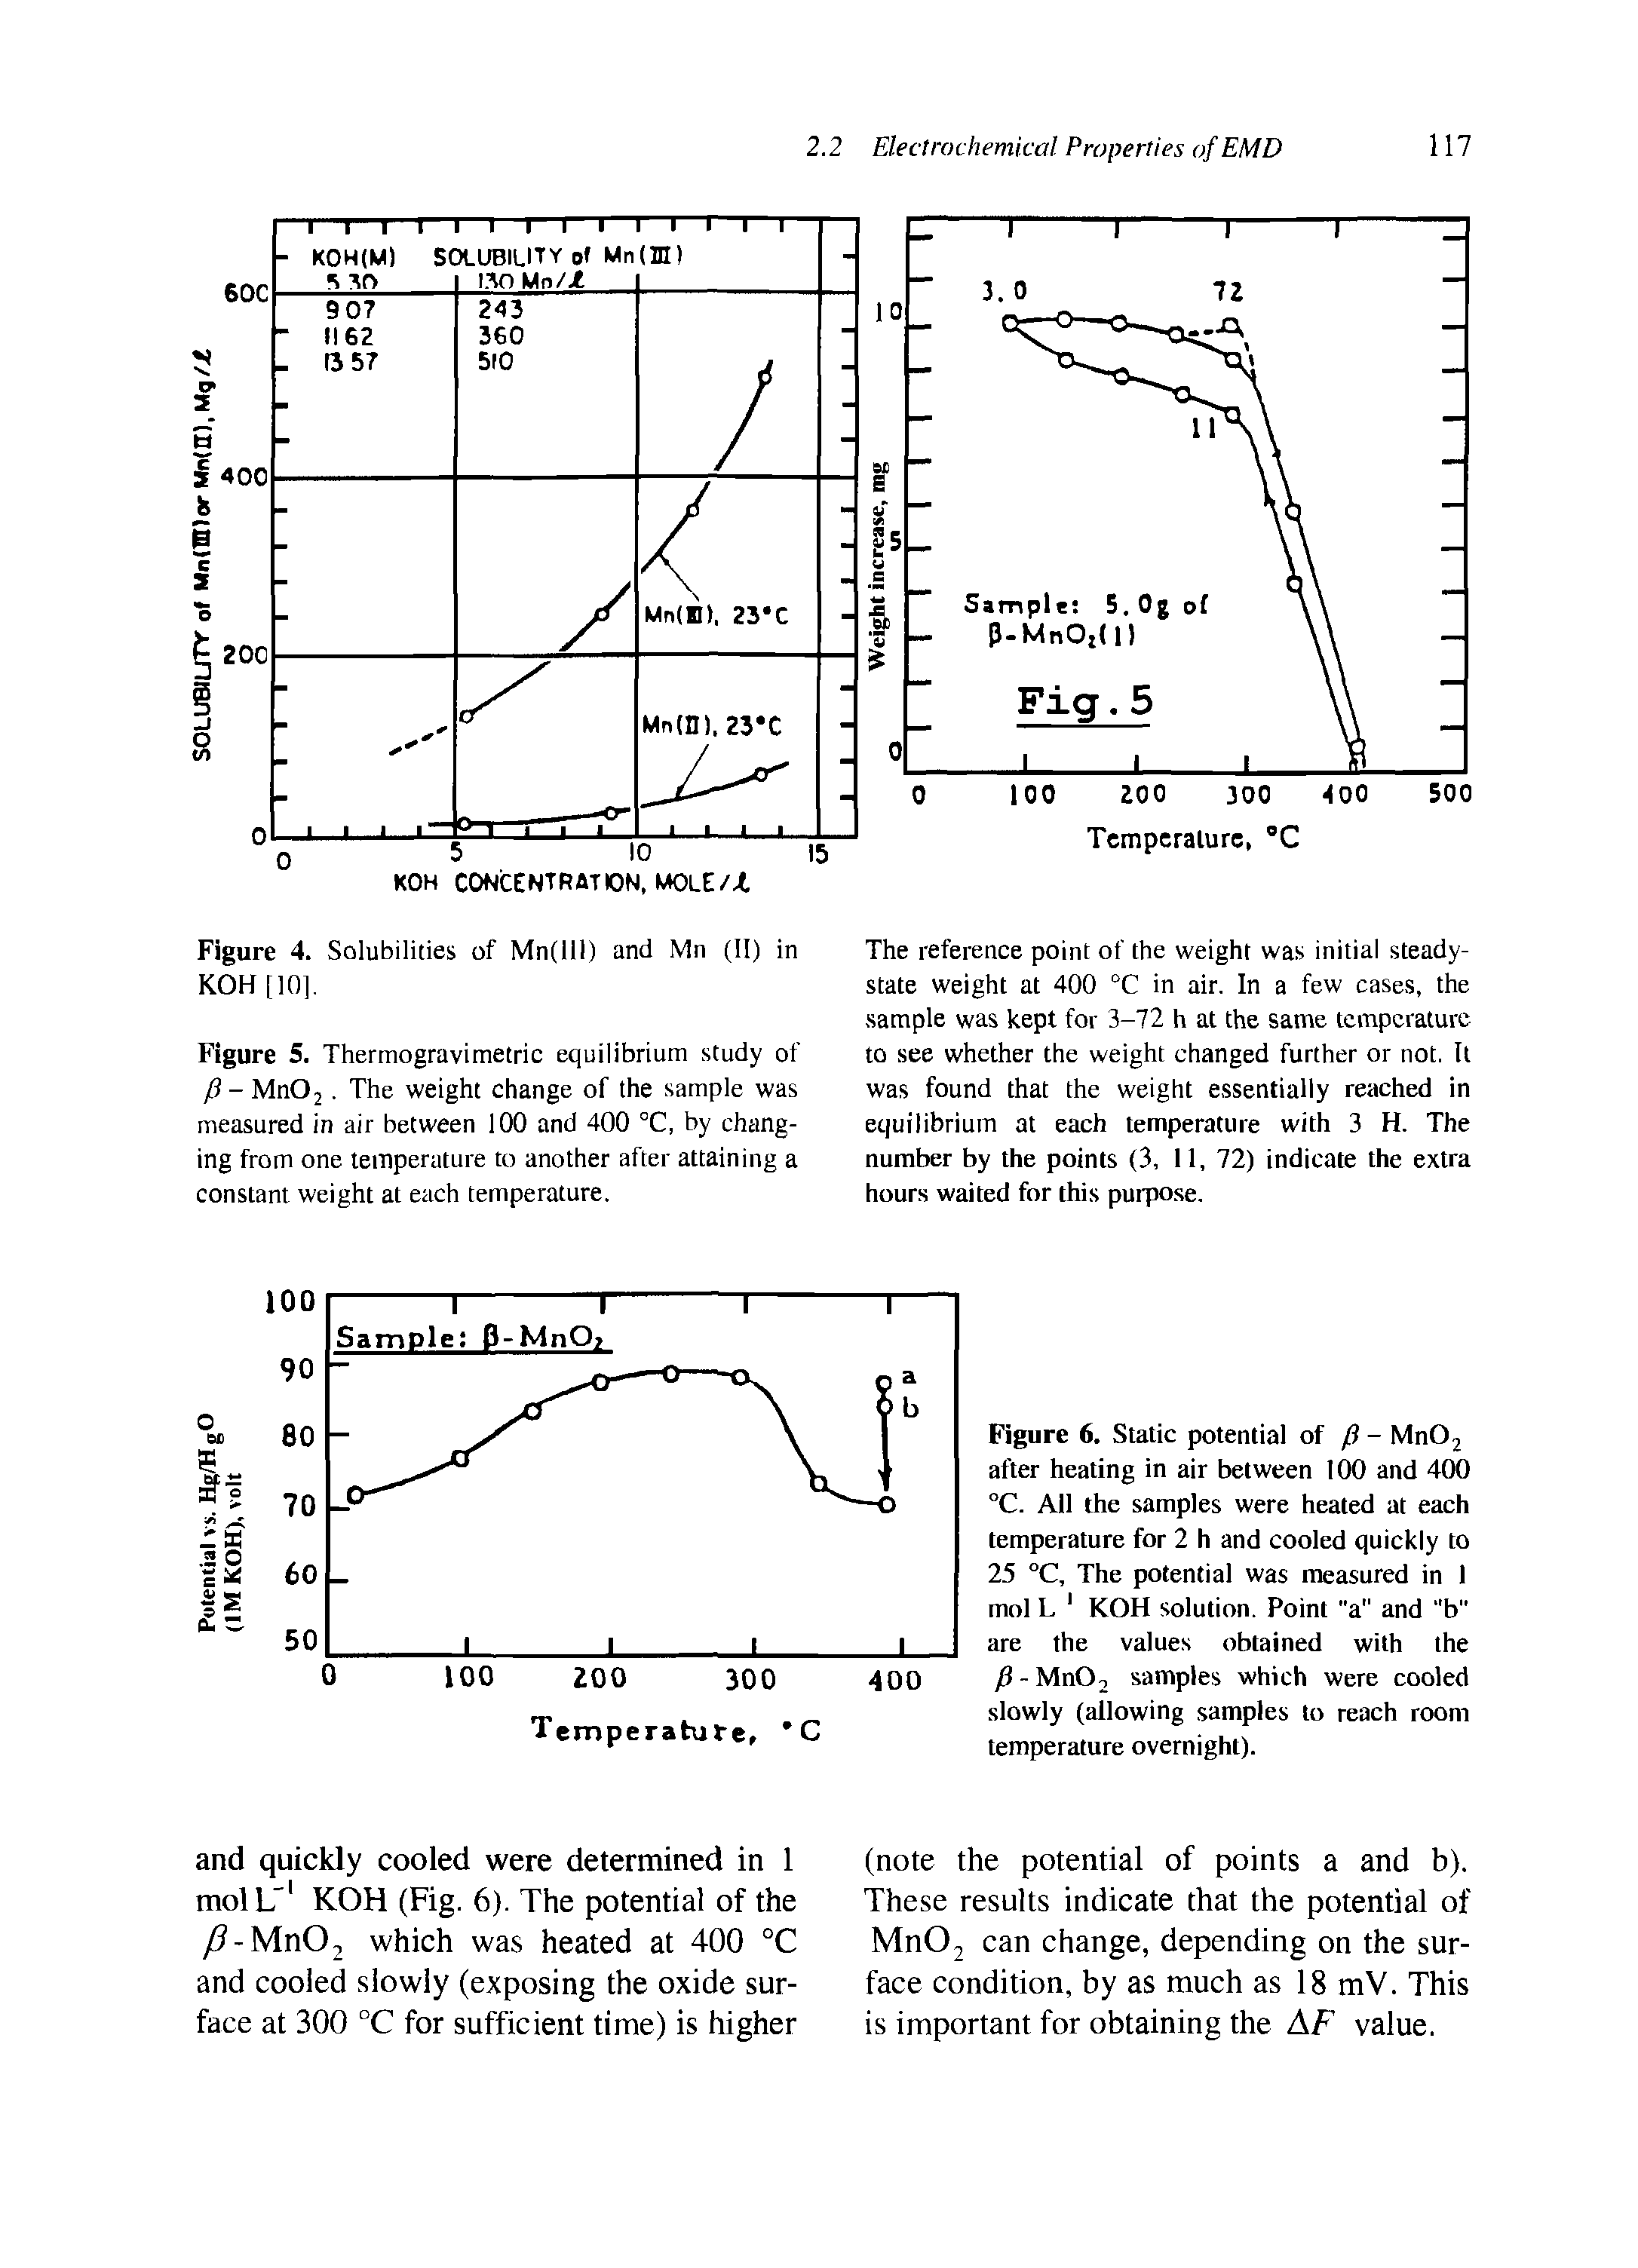 Figure 5. Thermogravimetric equilibrium study of P - Mn02. The weight change of the sample was measured in air between 100 and 400 °C, by changing from one temperature to another after attaining a constant weight at each temperature.